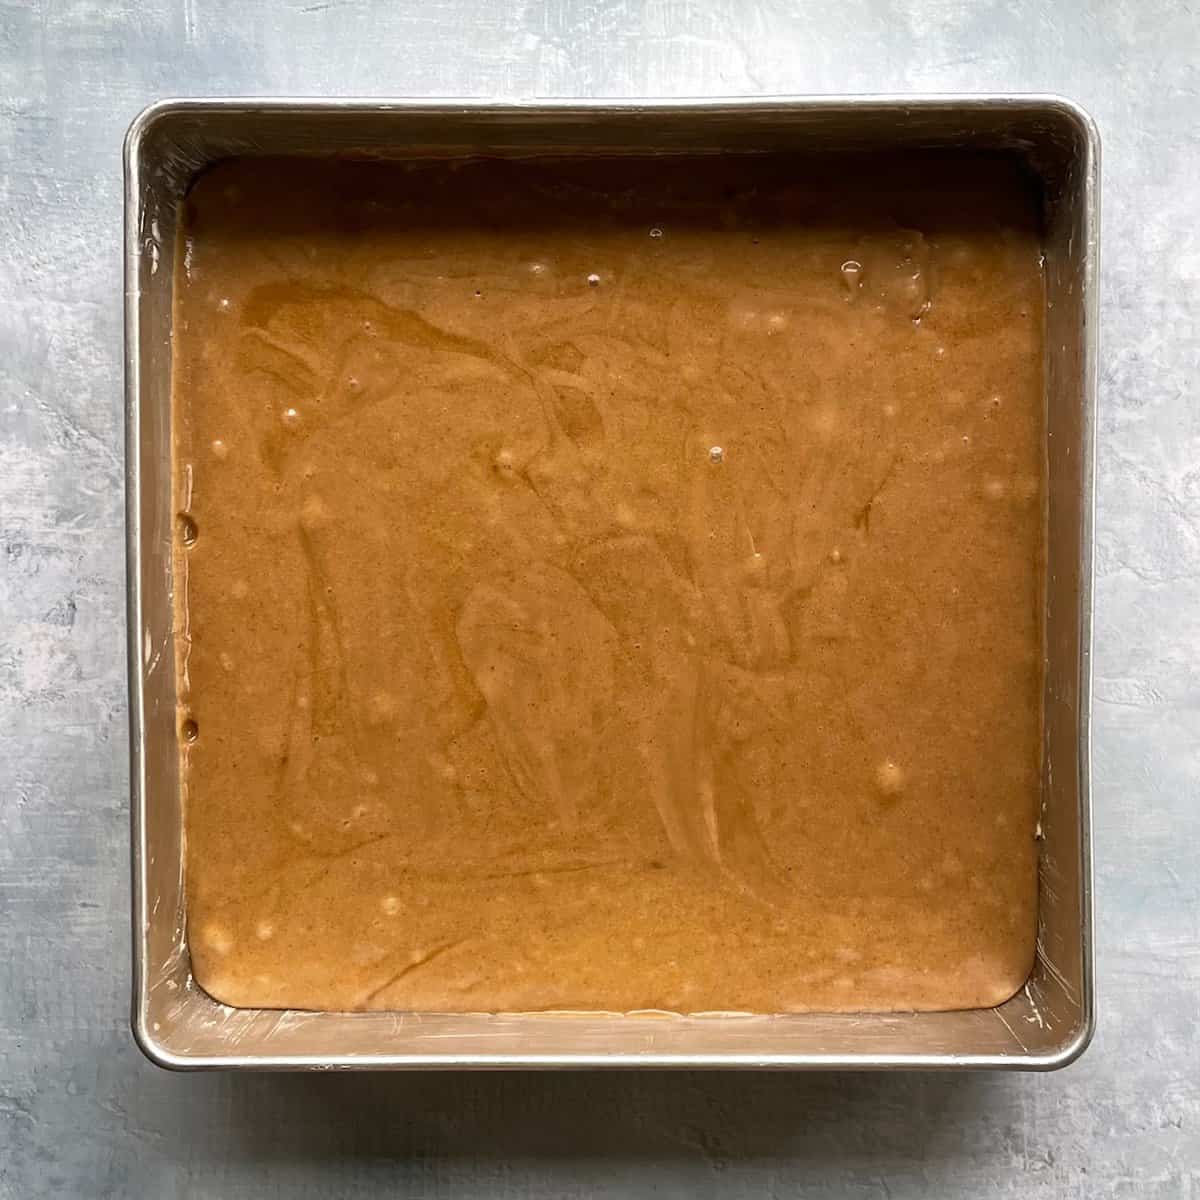 Biscoff blondie base in a greased square baking pan.